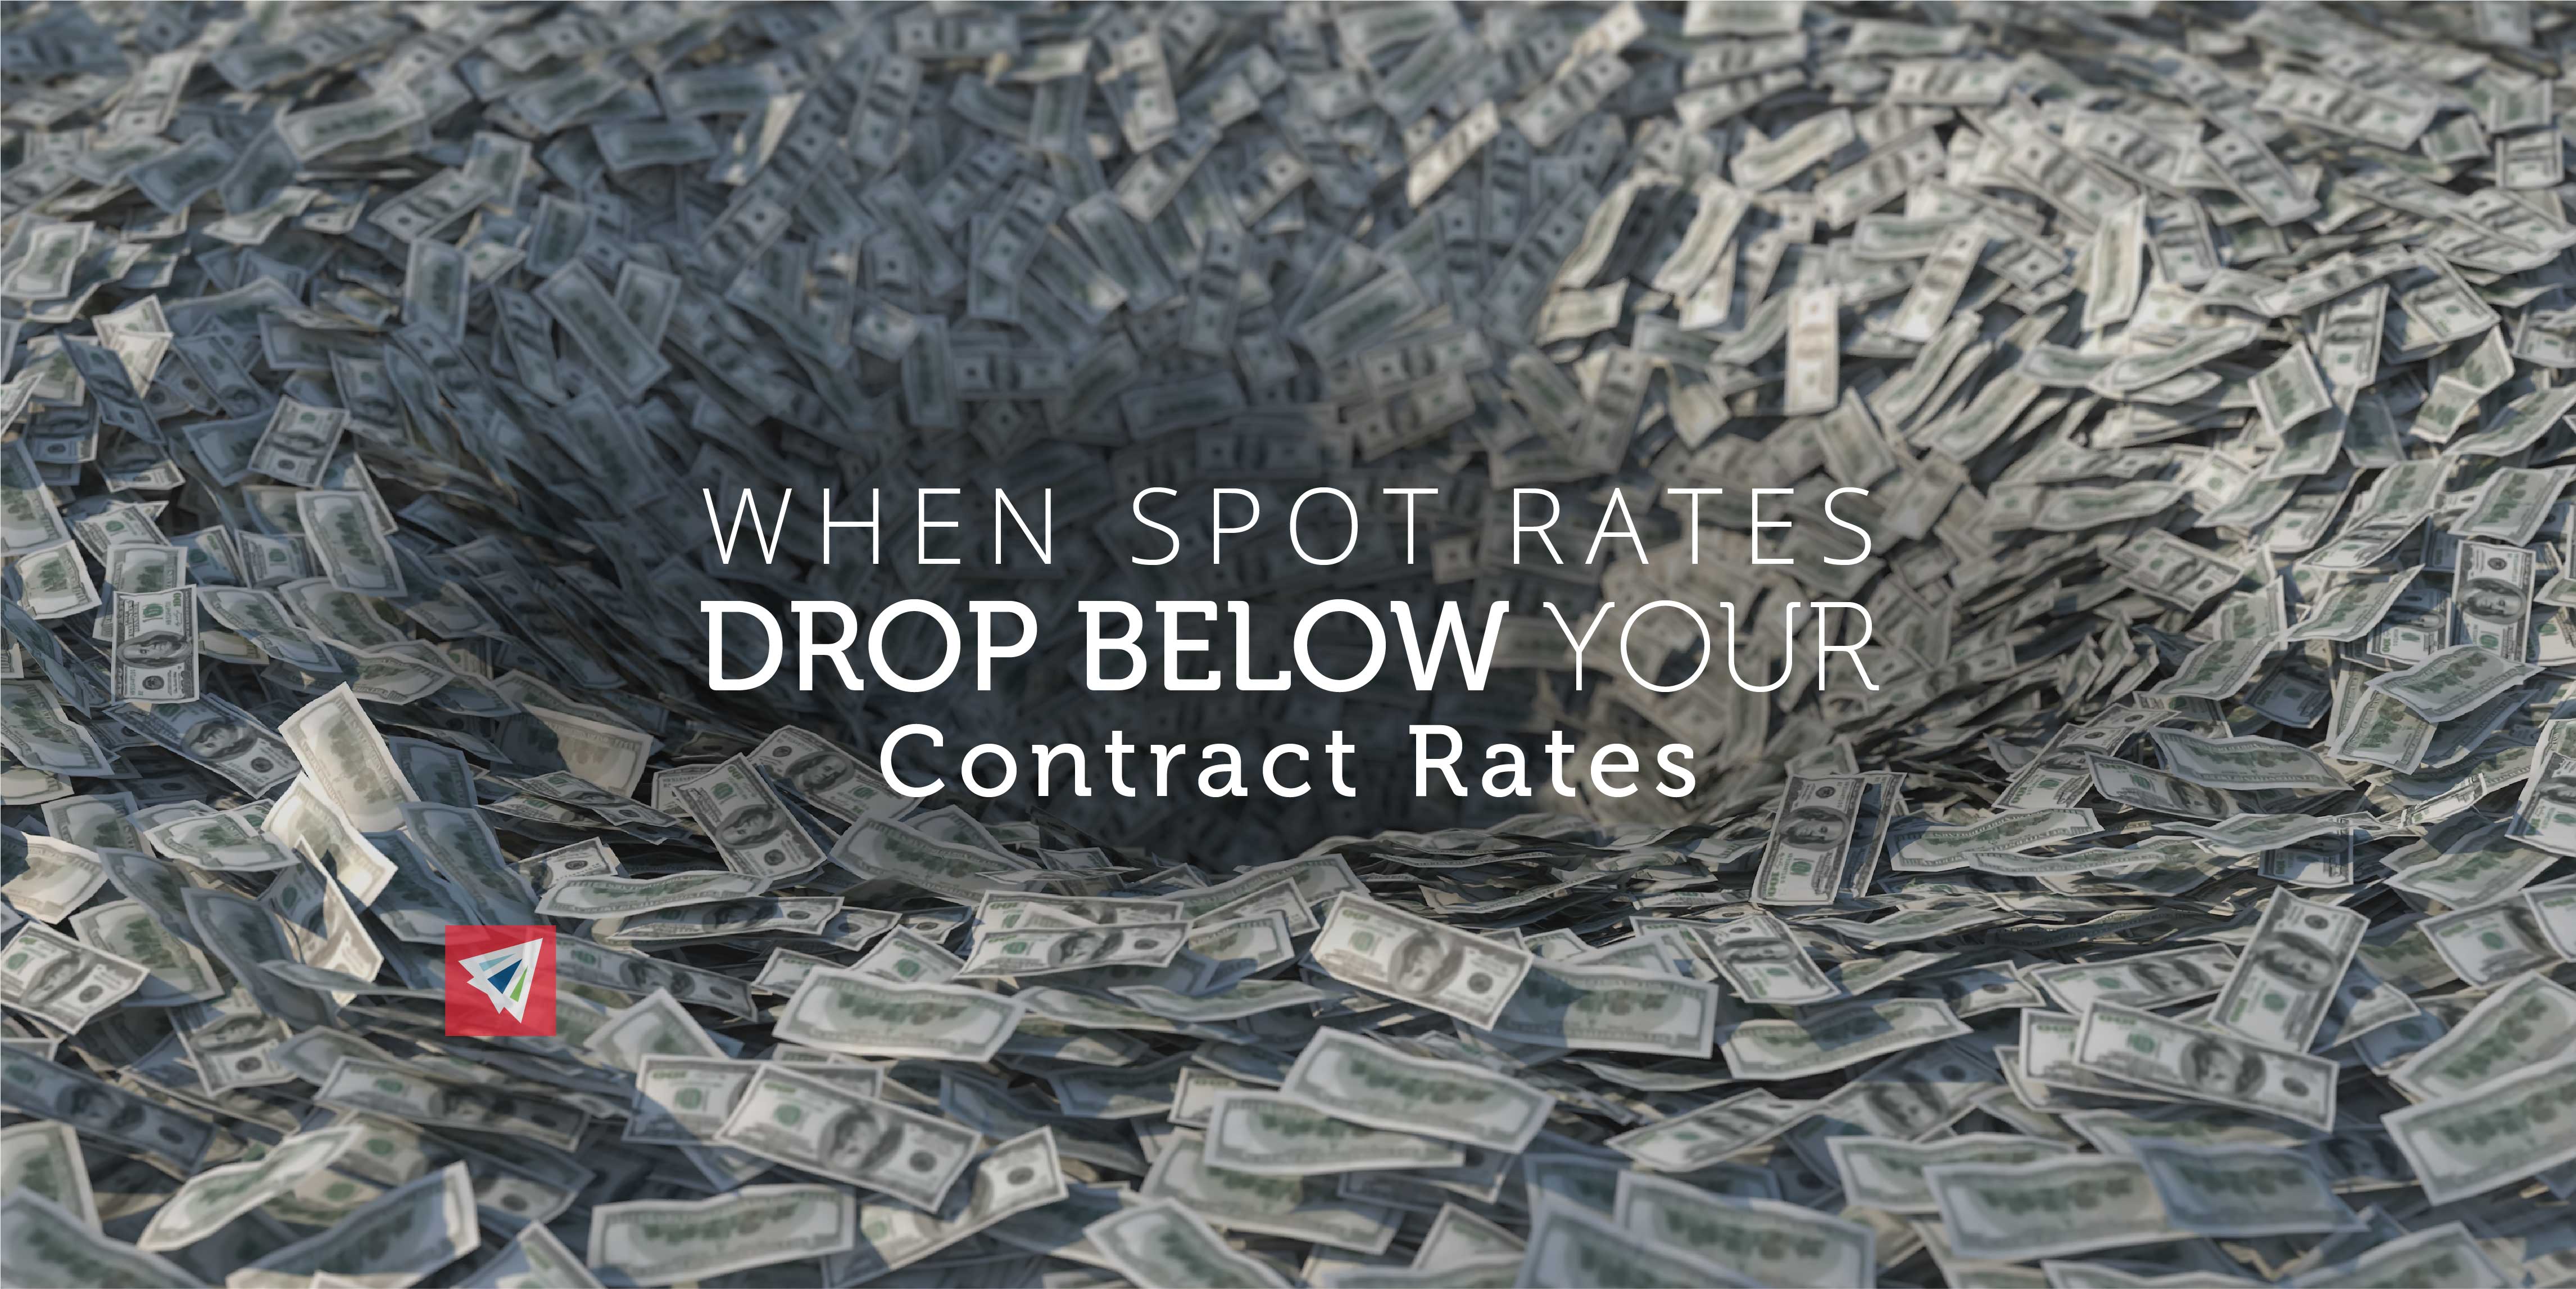 When Spot Rates Drop Below Your Contract Rates